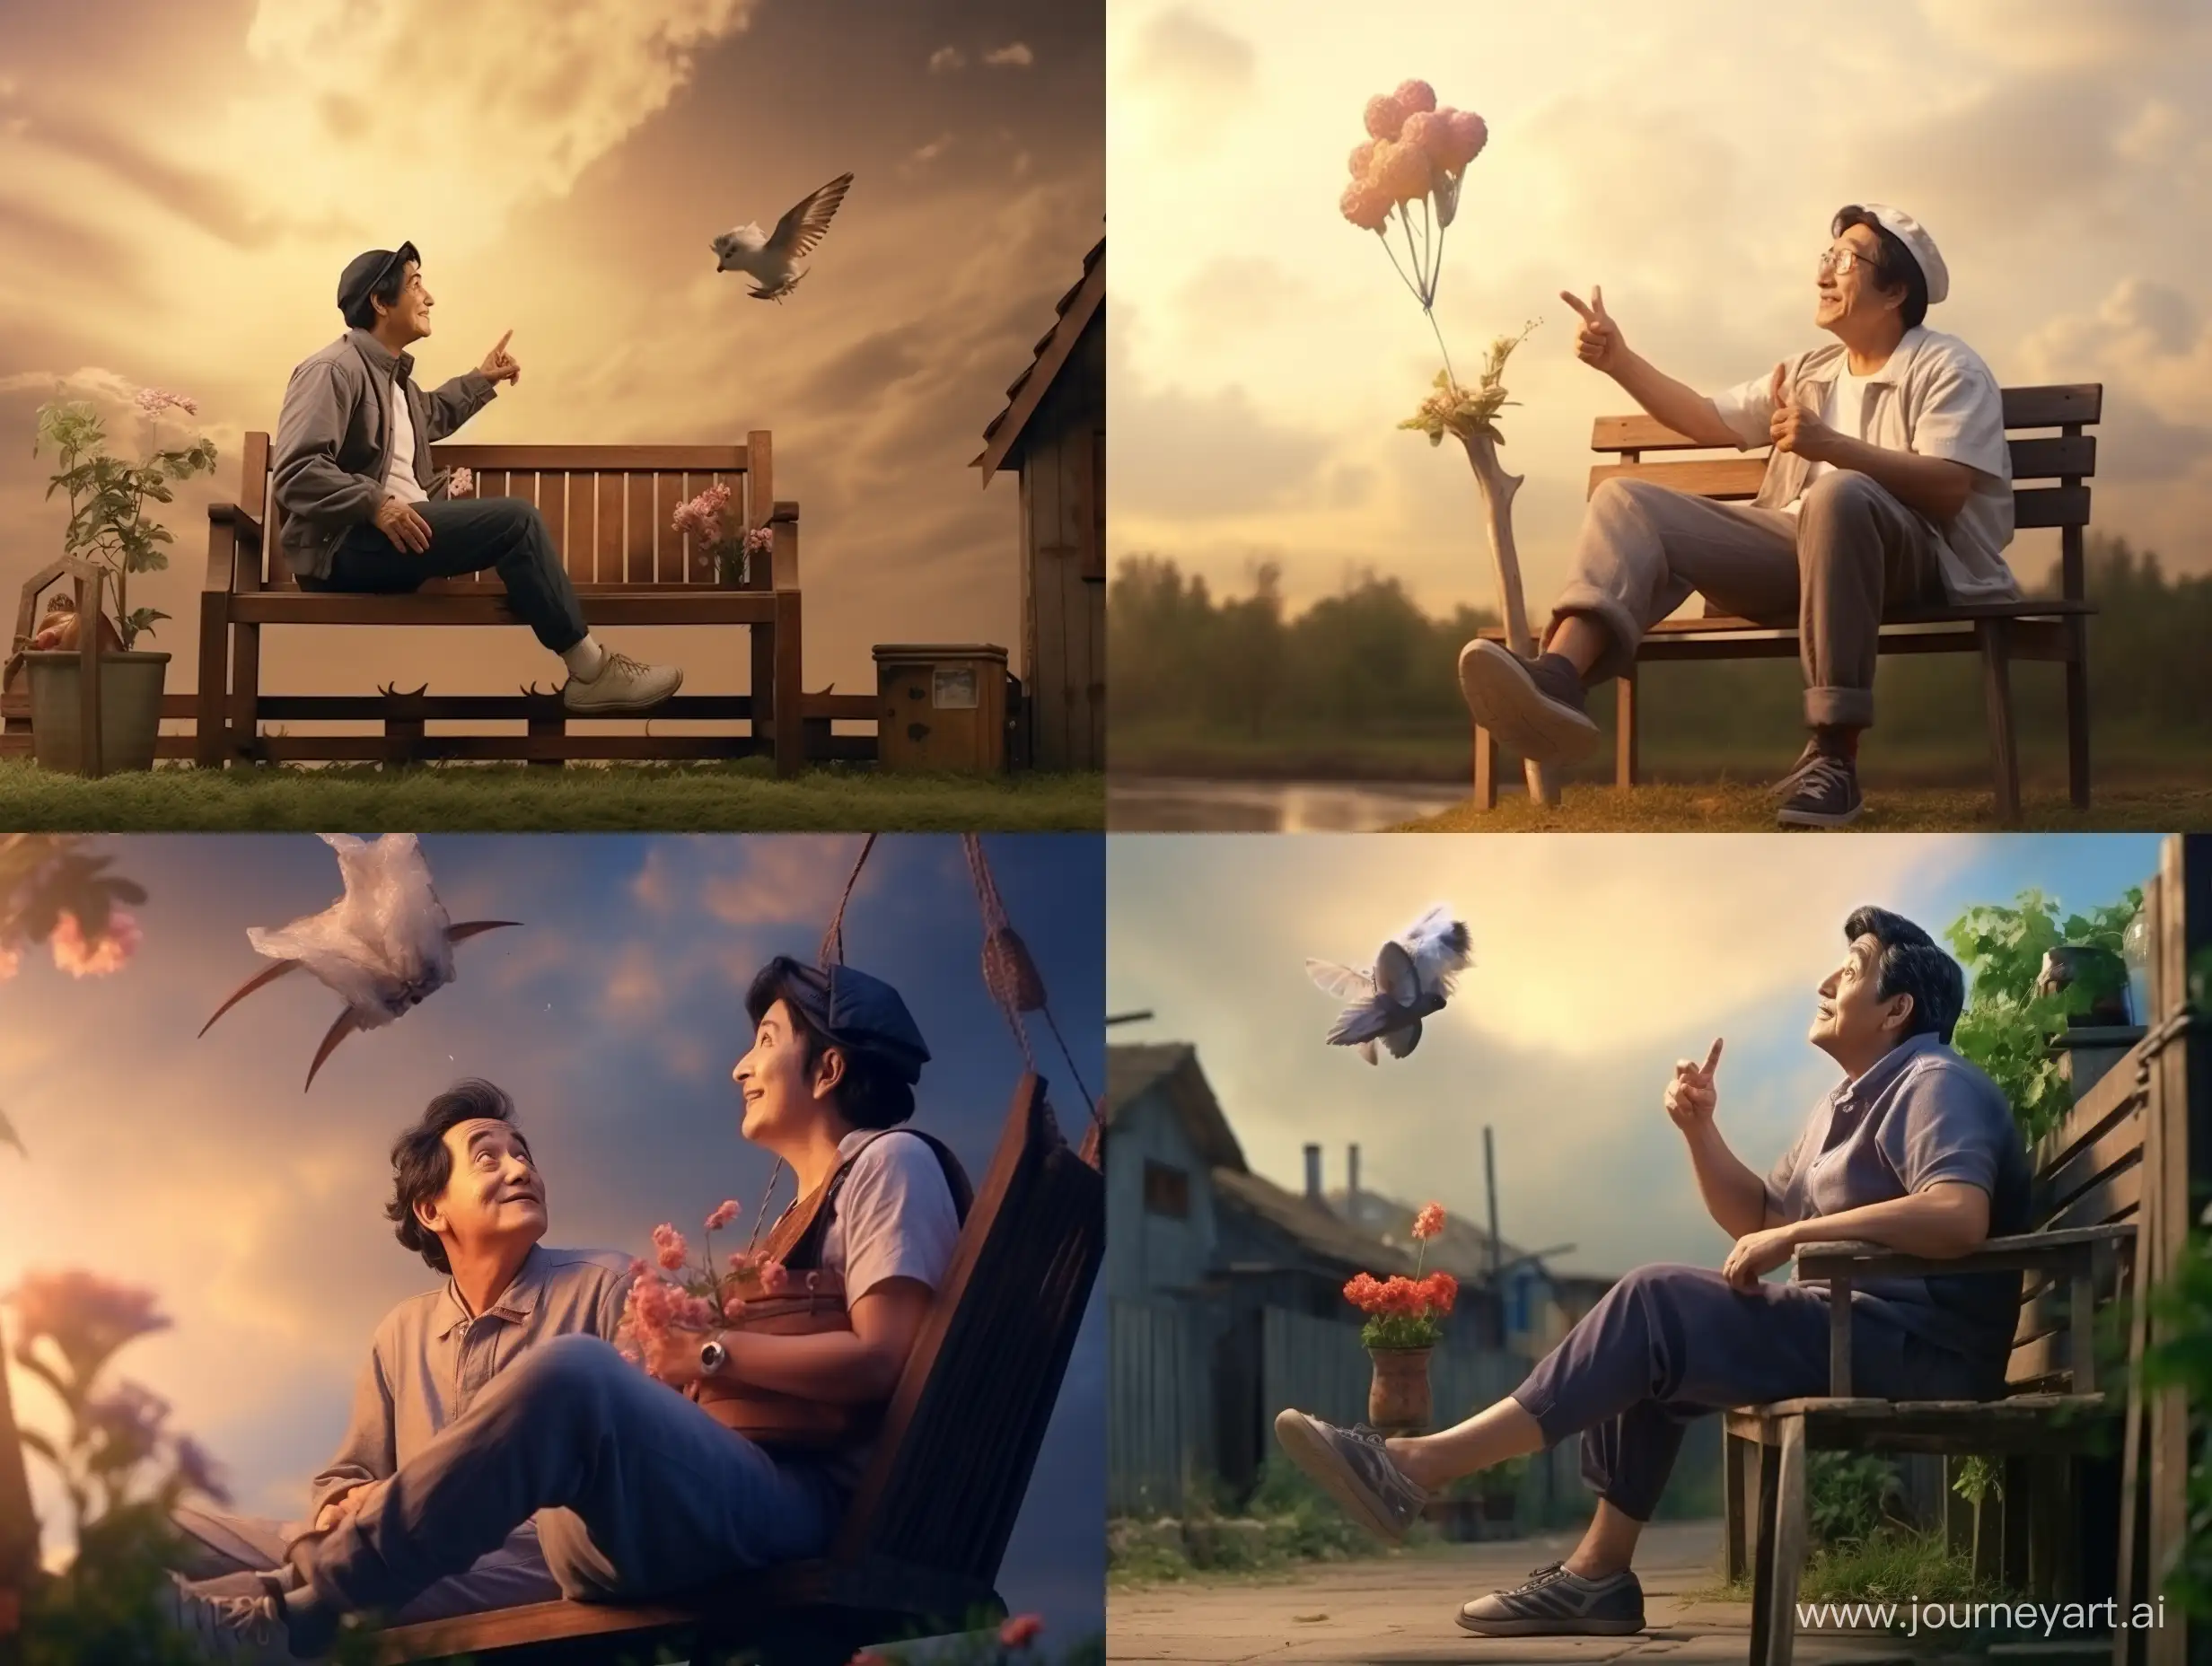 Jackie-Chan-Engaging-in-Heartfelt-Conversations-with-Grandmothers-as-a-Rocket-Soars-in-Realistic-Photo-Style